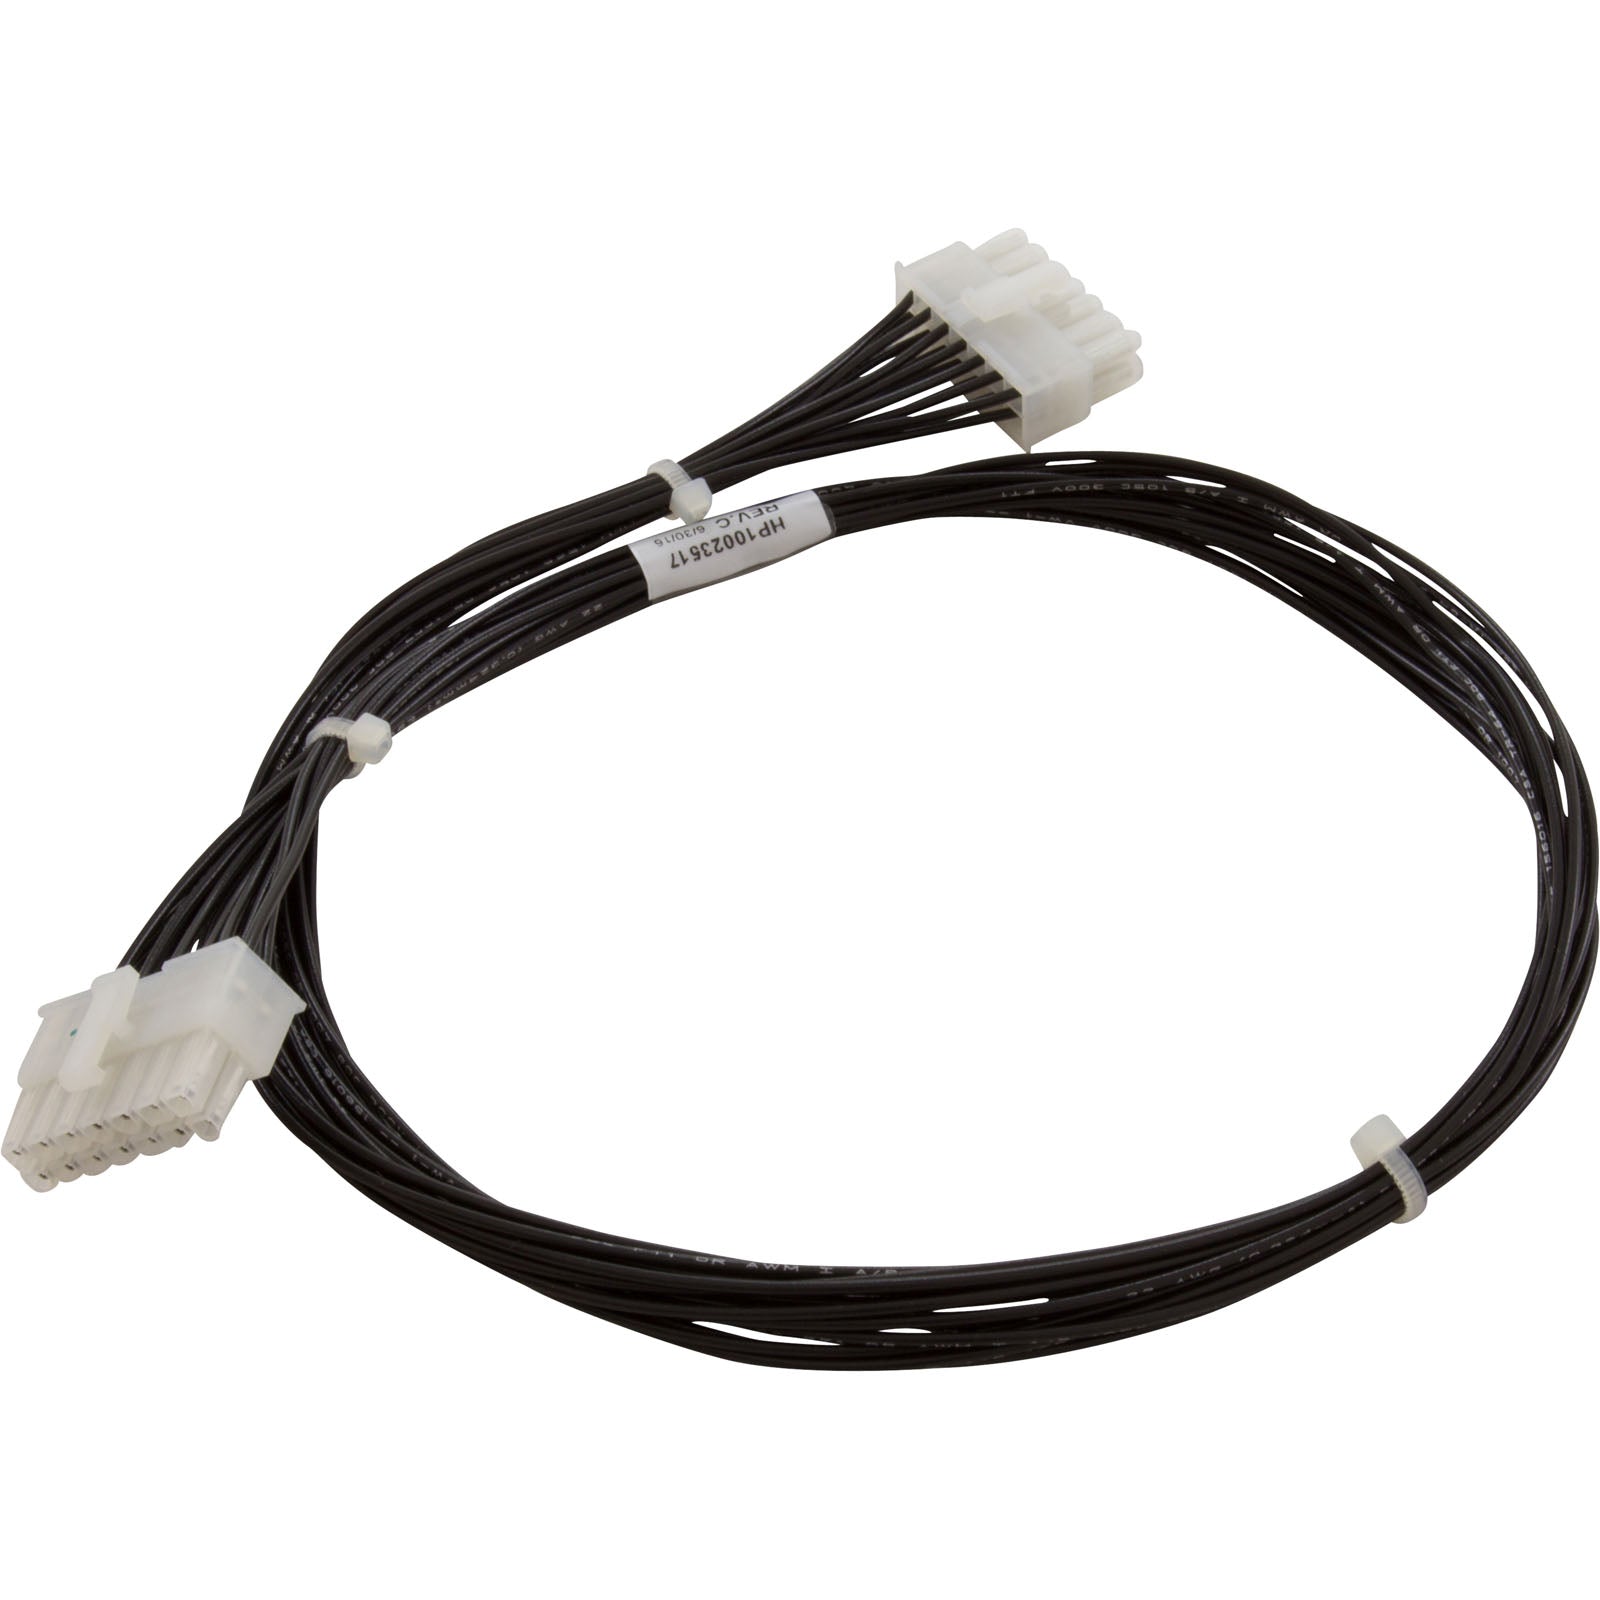 Cable-Hpc/ HPX10023517